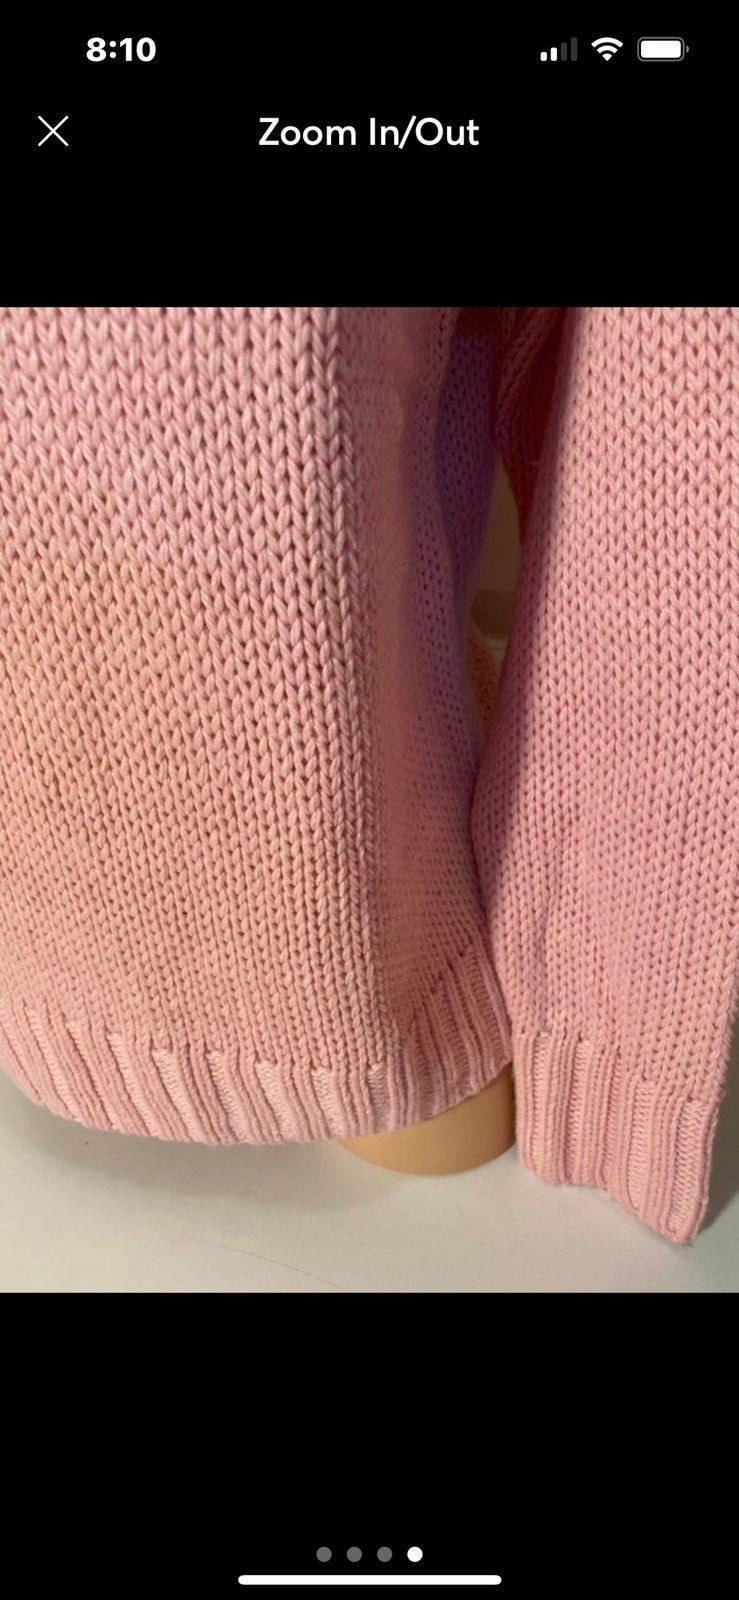 high discount Pink v neck sweater size XS,S,M NWT kkU6tmczK Great